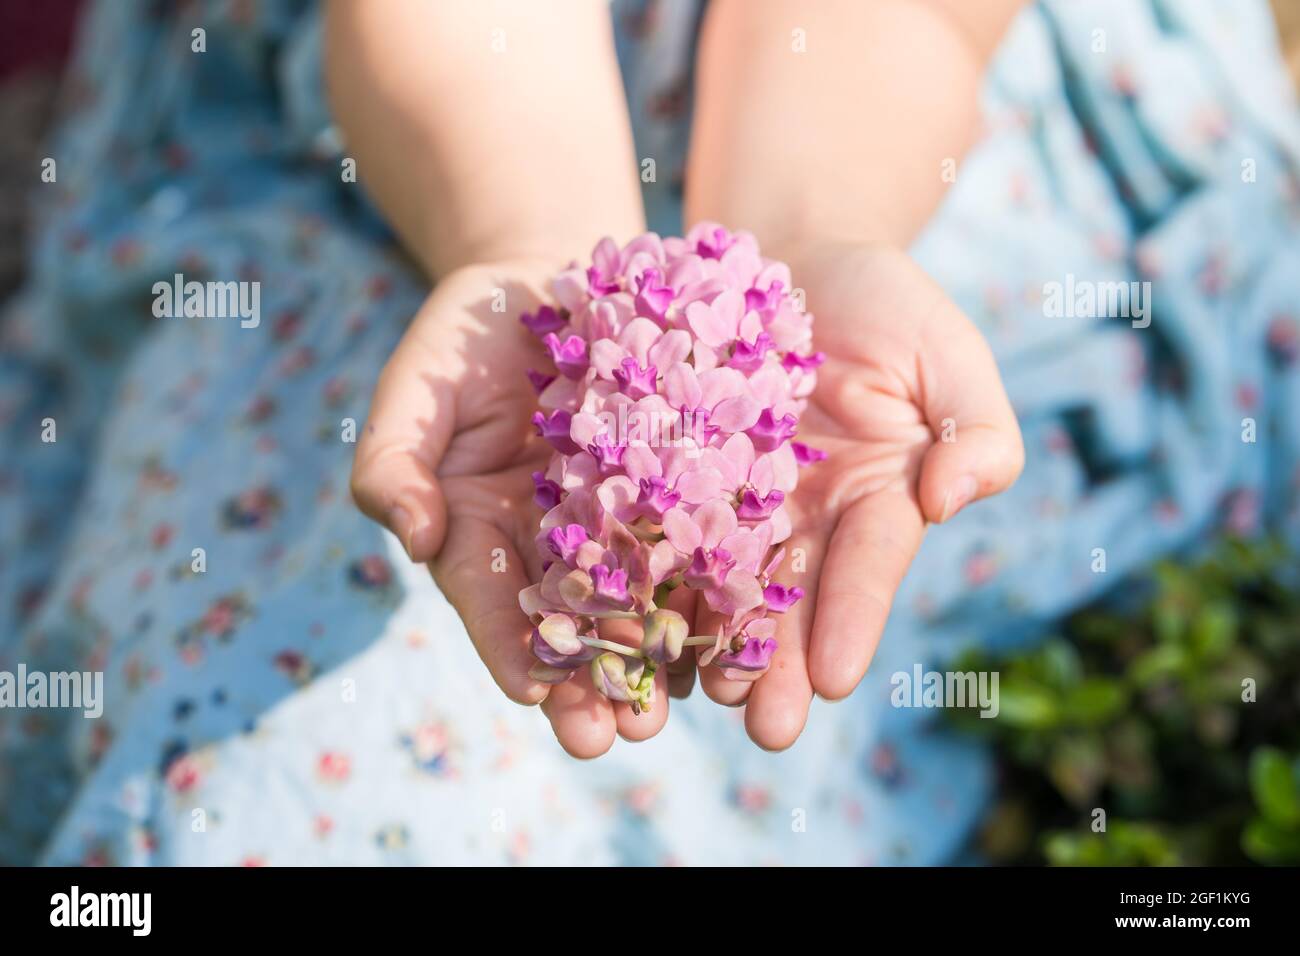 Blooming pink flowers on a female kid's hands Stock Photo